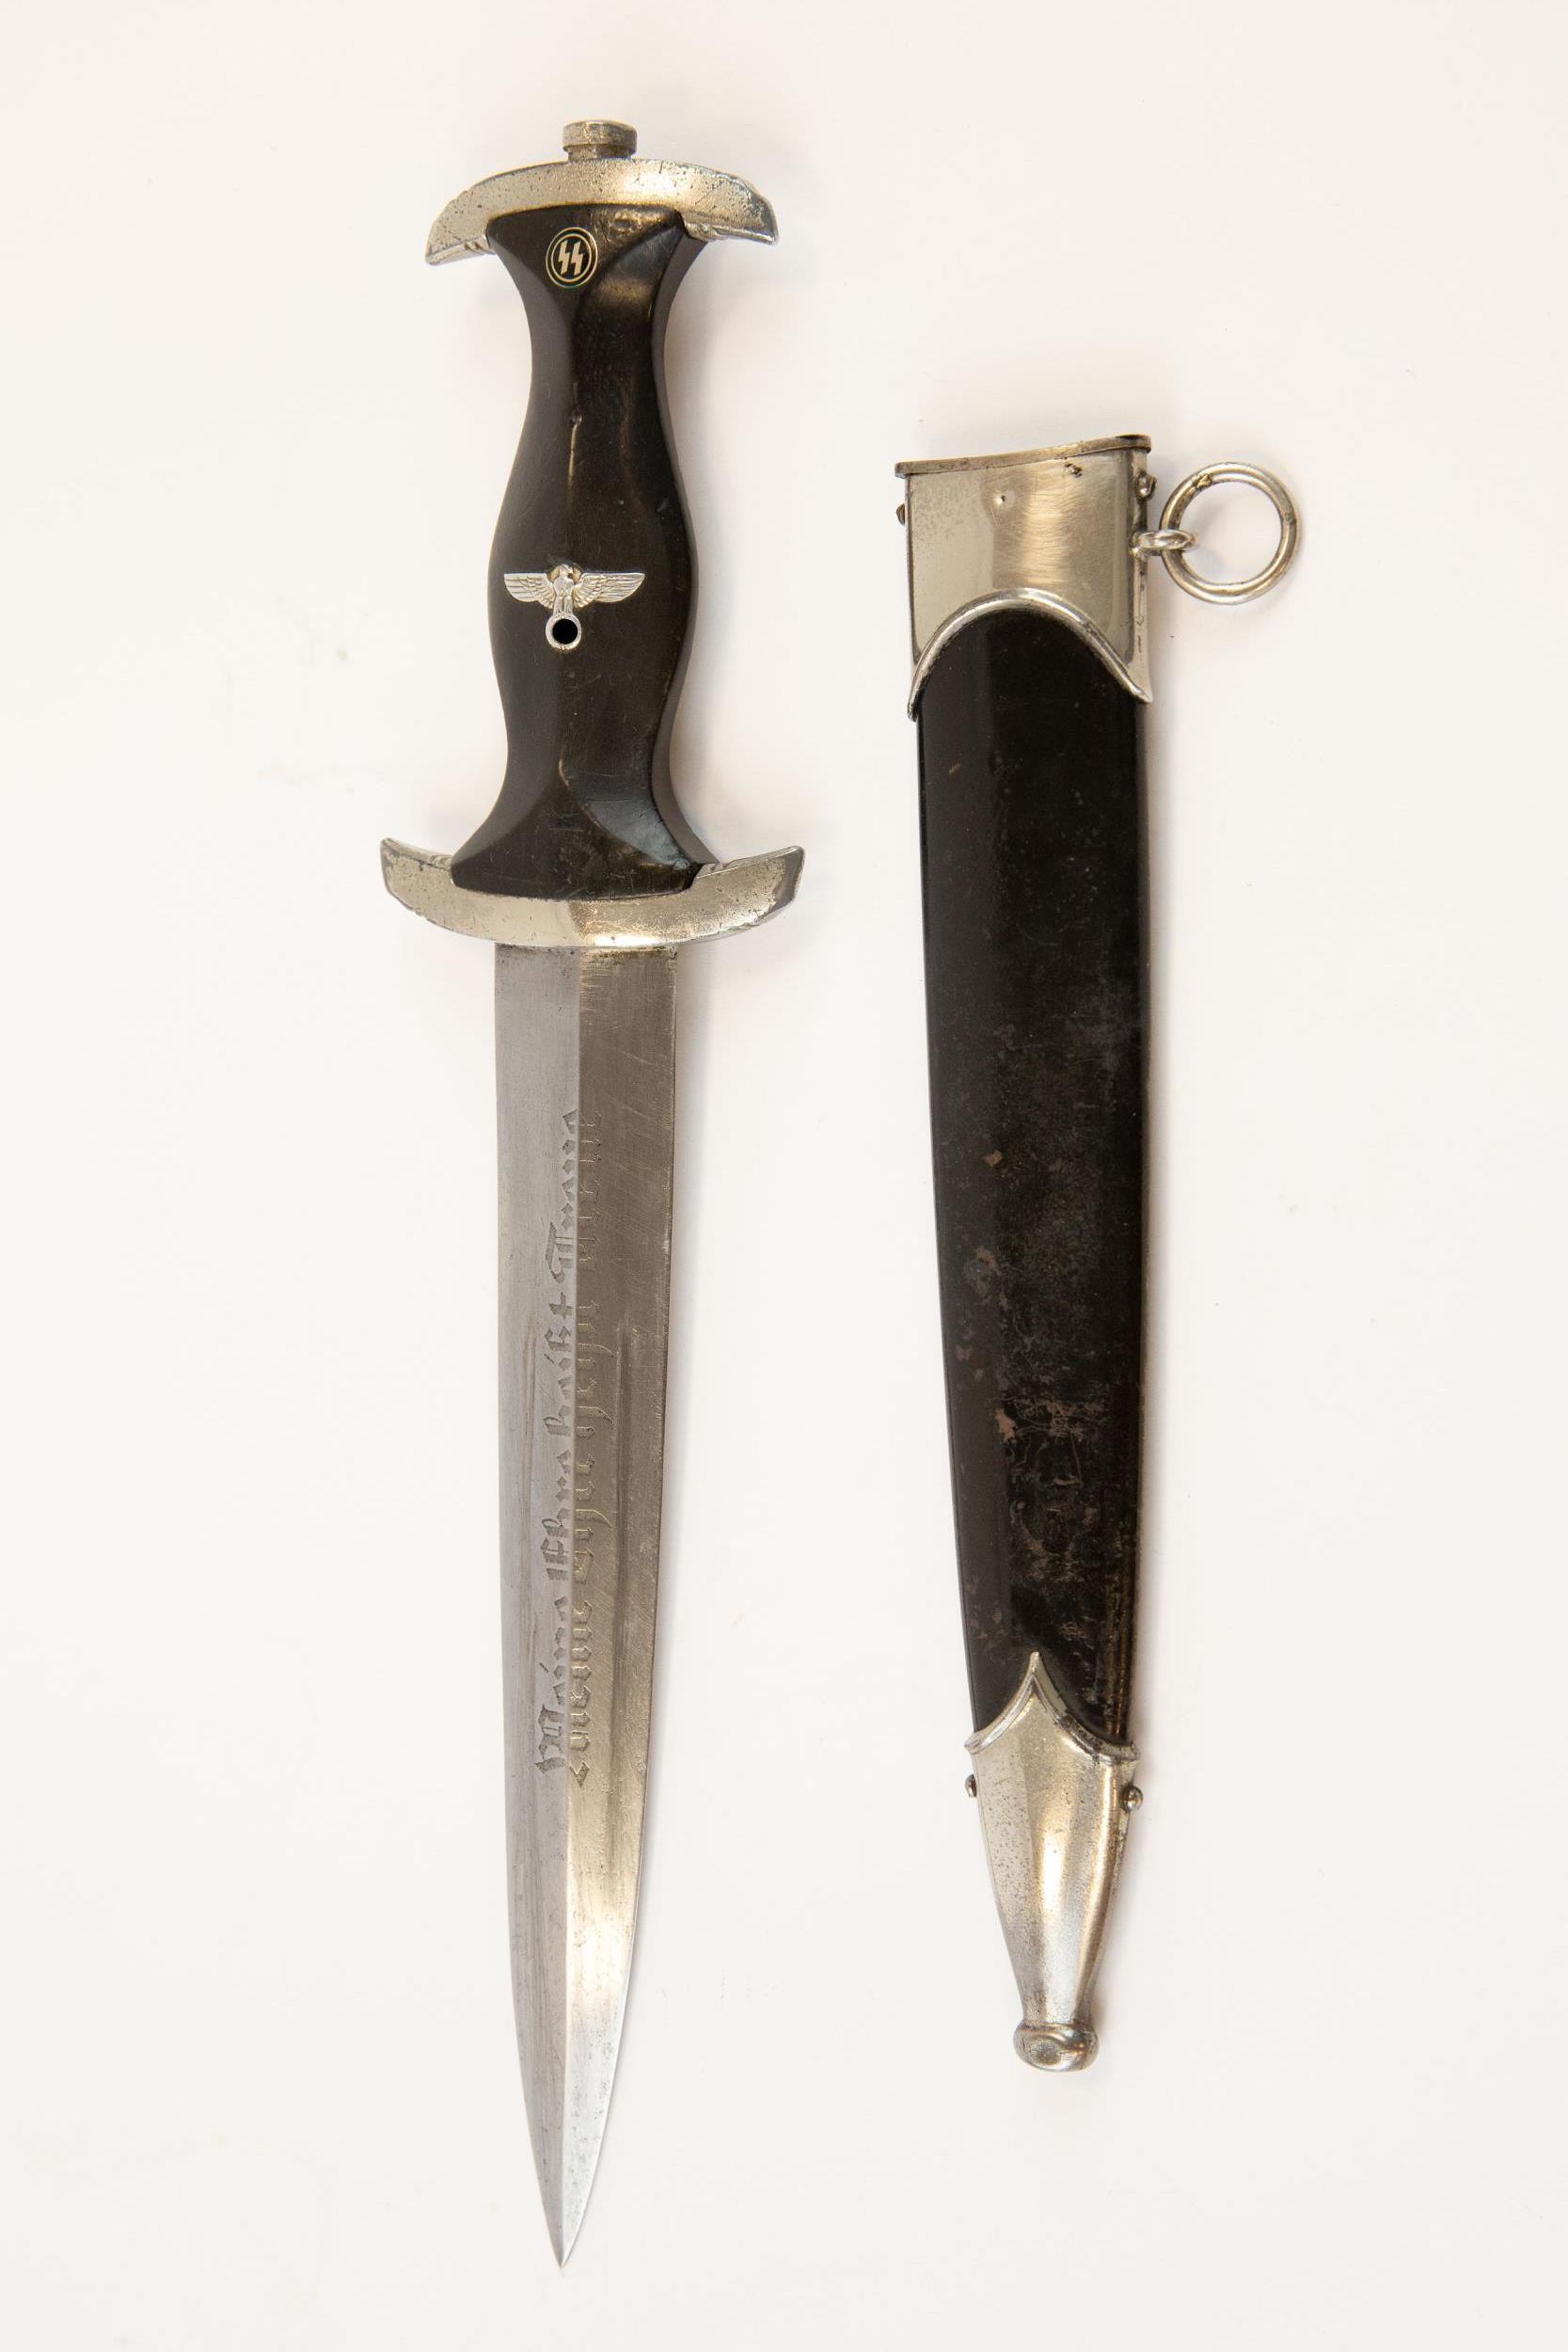 A Third Reich 1933 model SS dagger, the blade etched with RZM and SS marks and "M7/67 1940" (